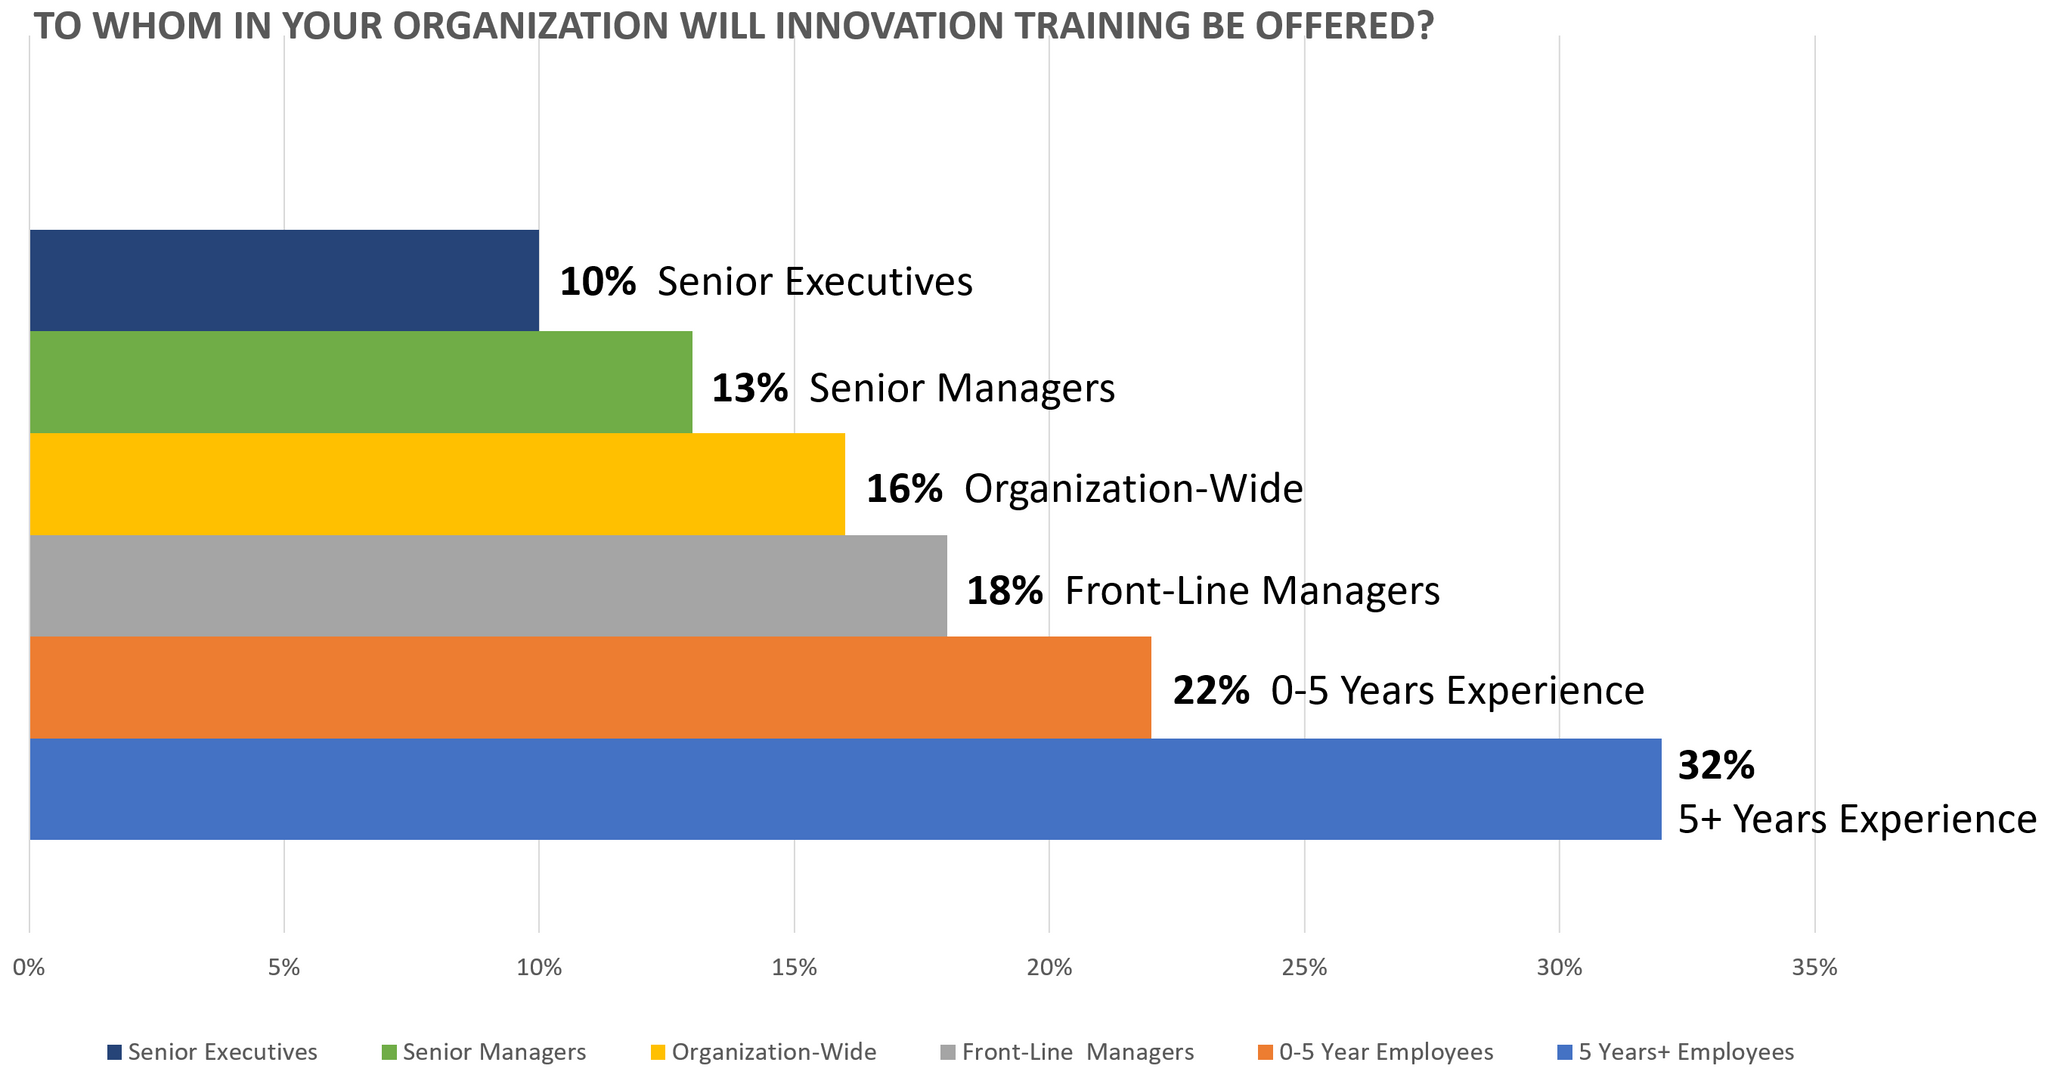 Innovation Training Plans Survey Question 2 Results SOLUTIONSpeople.com